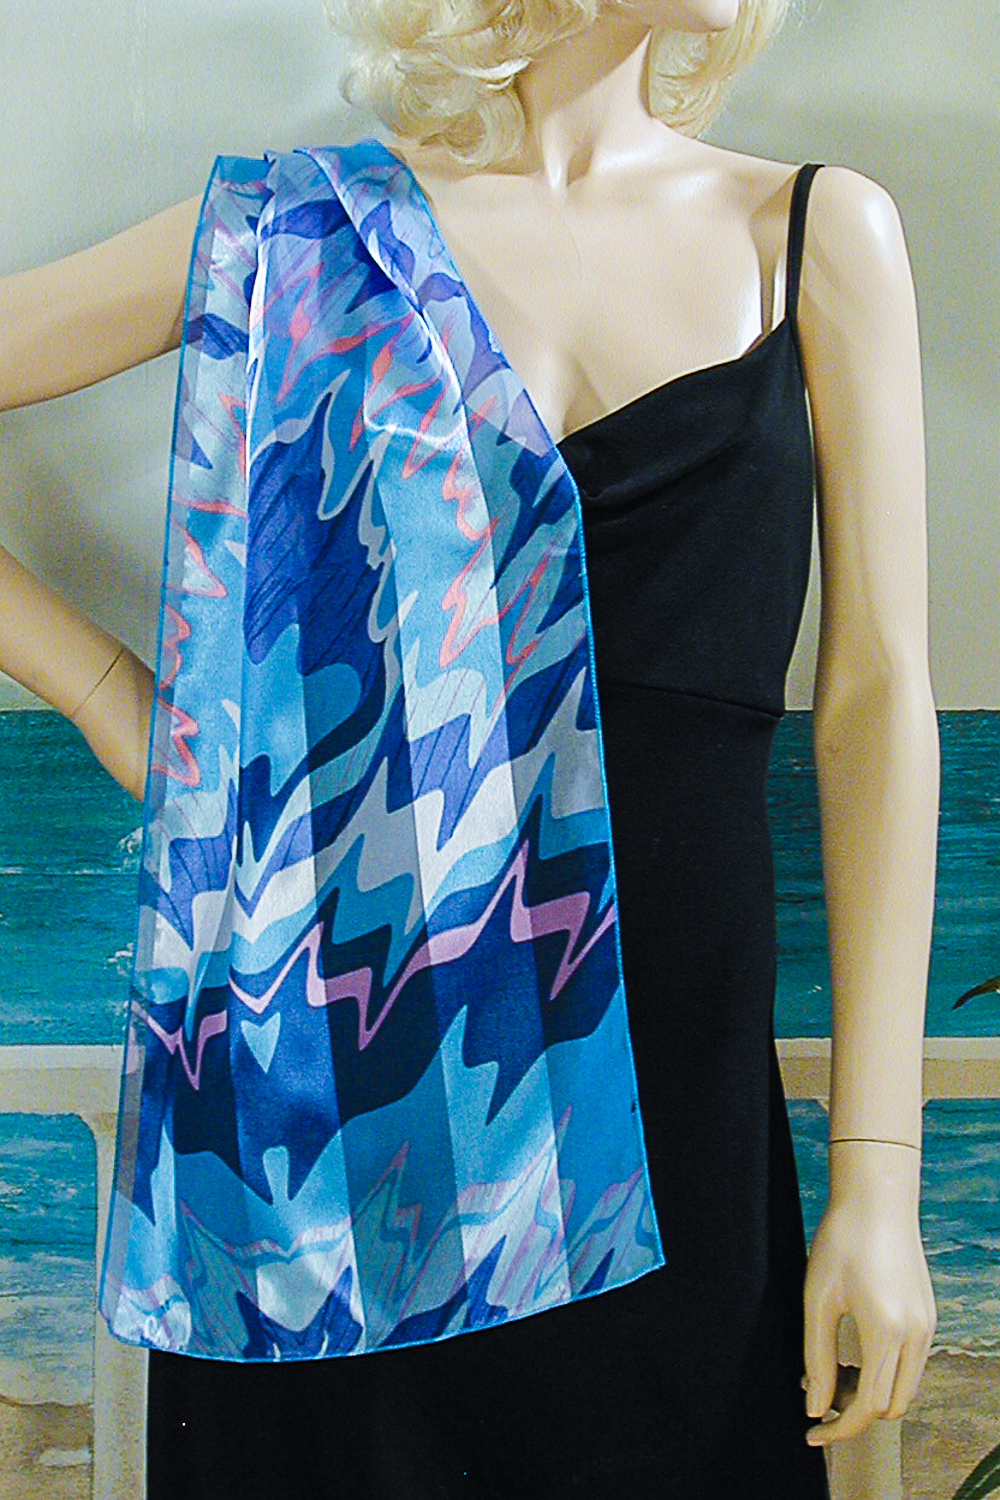 Colorful Chiffon and Satin Scarf with Zigzag Design, a fashion accessorie - Evening Elegance